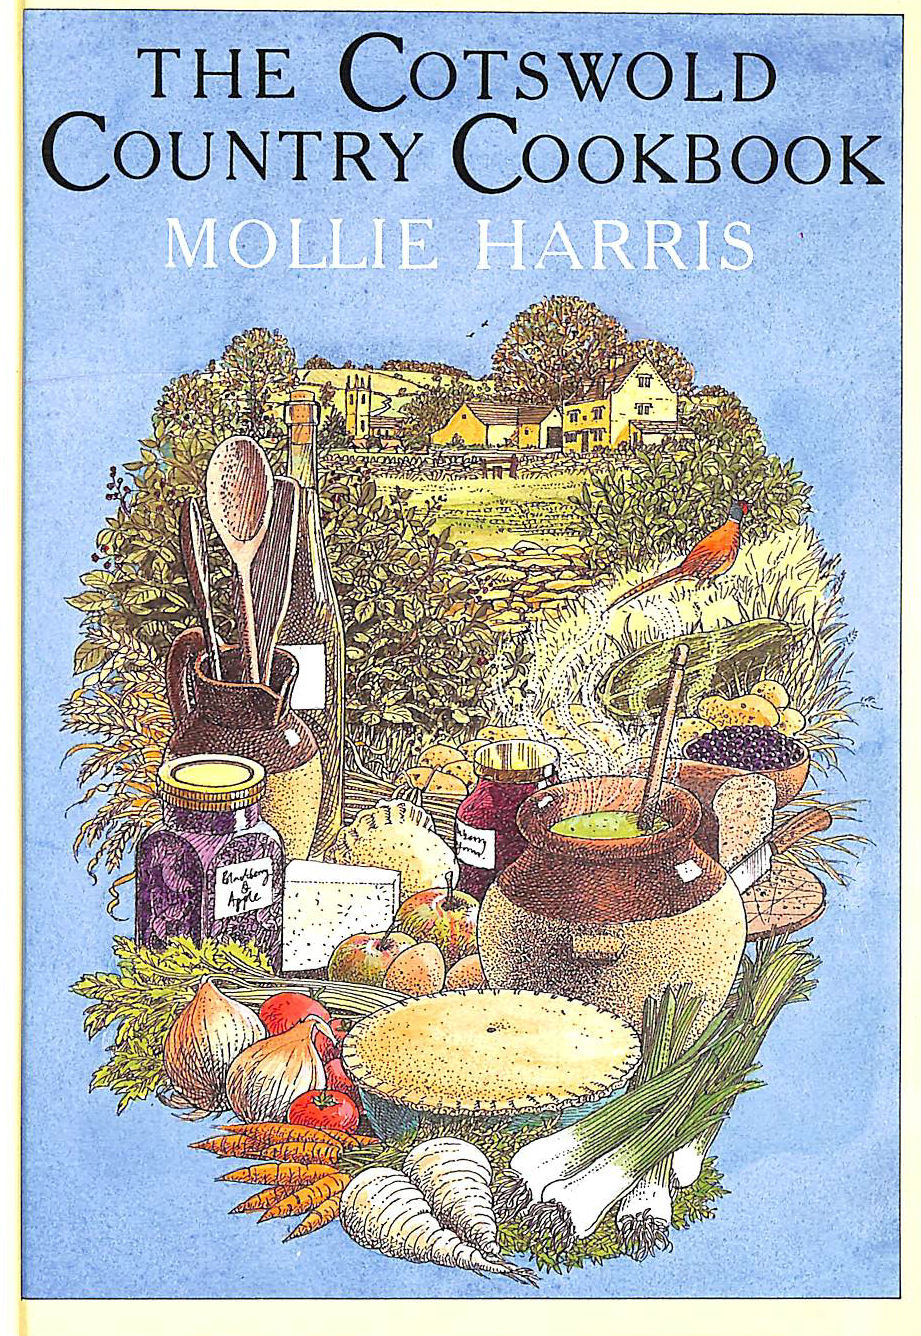 HARRIS, MOLLIE - The Cotswold Country Cook Book